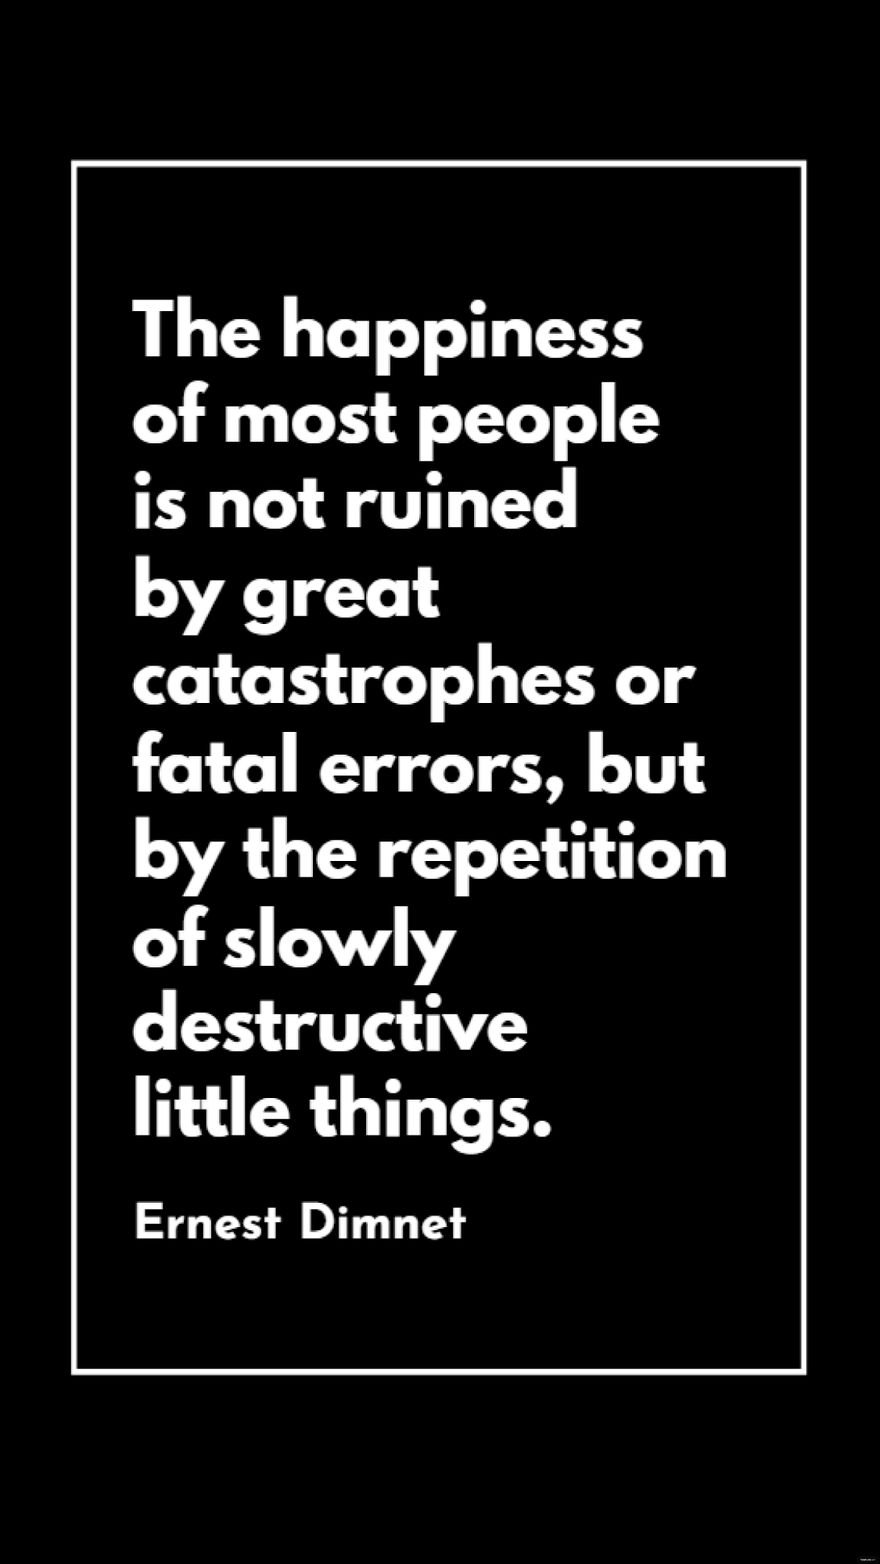 Ernest Dimnet - The happiness of most people is not ruined by great catastrophes or fatal errors, but by the repetition of slowly destructive little things.